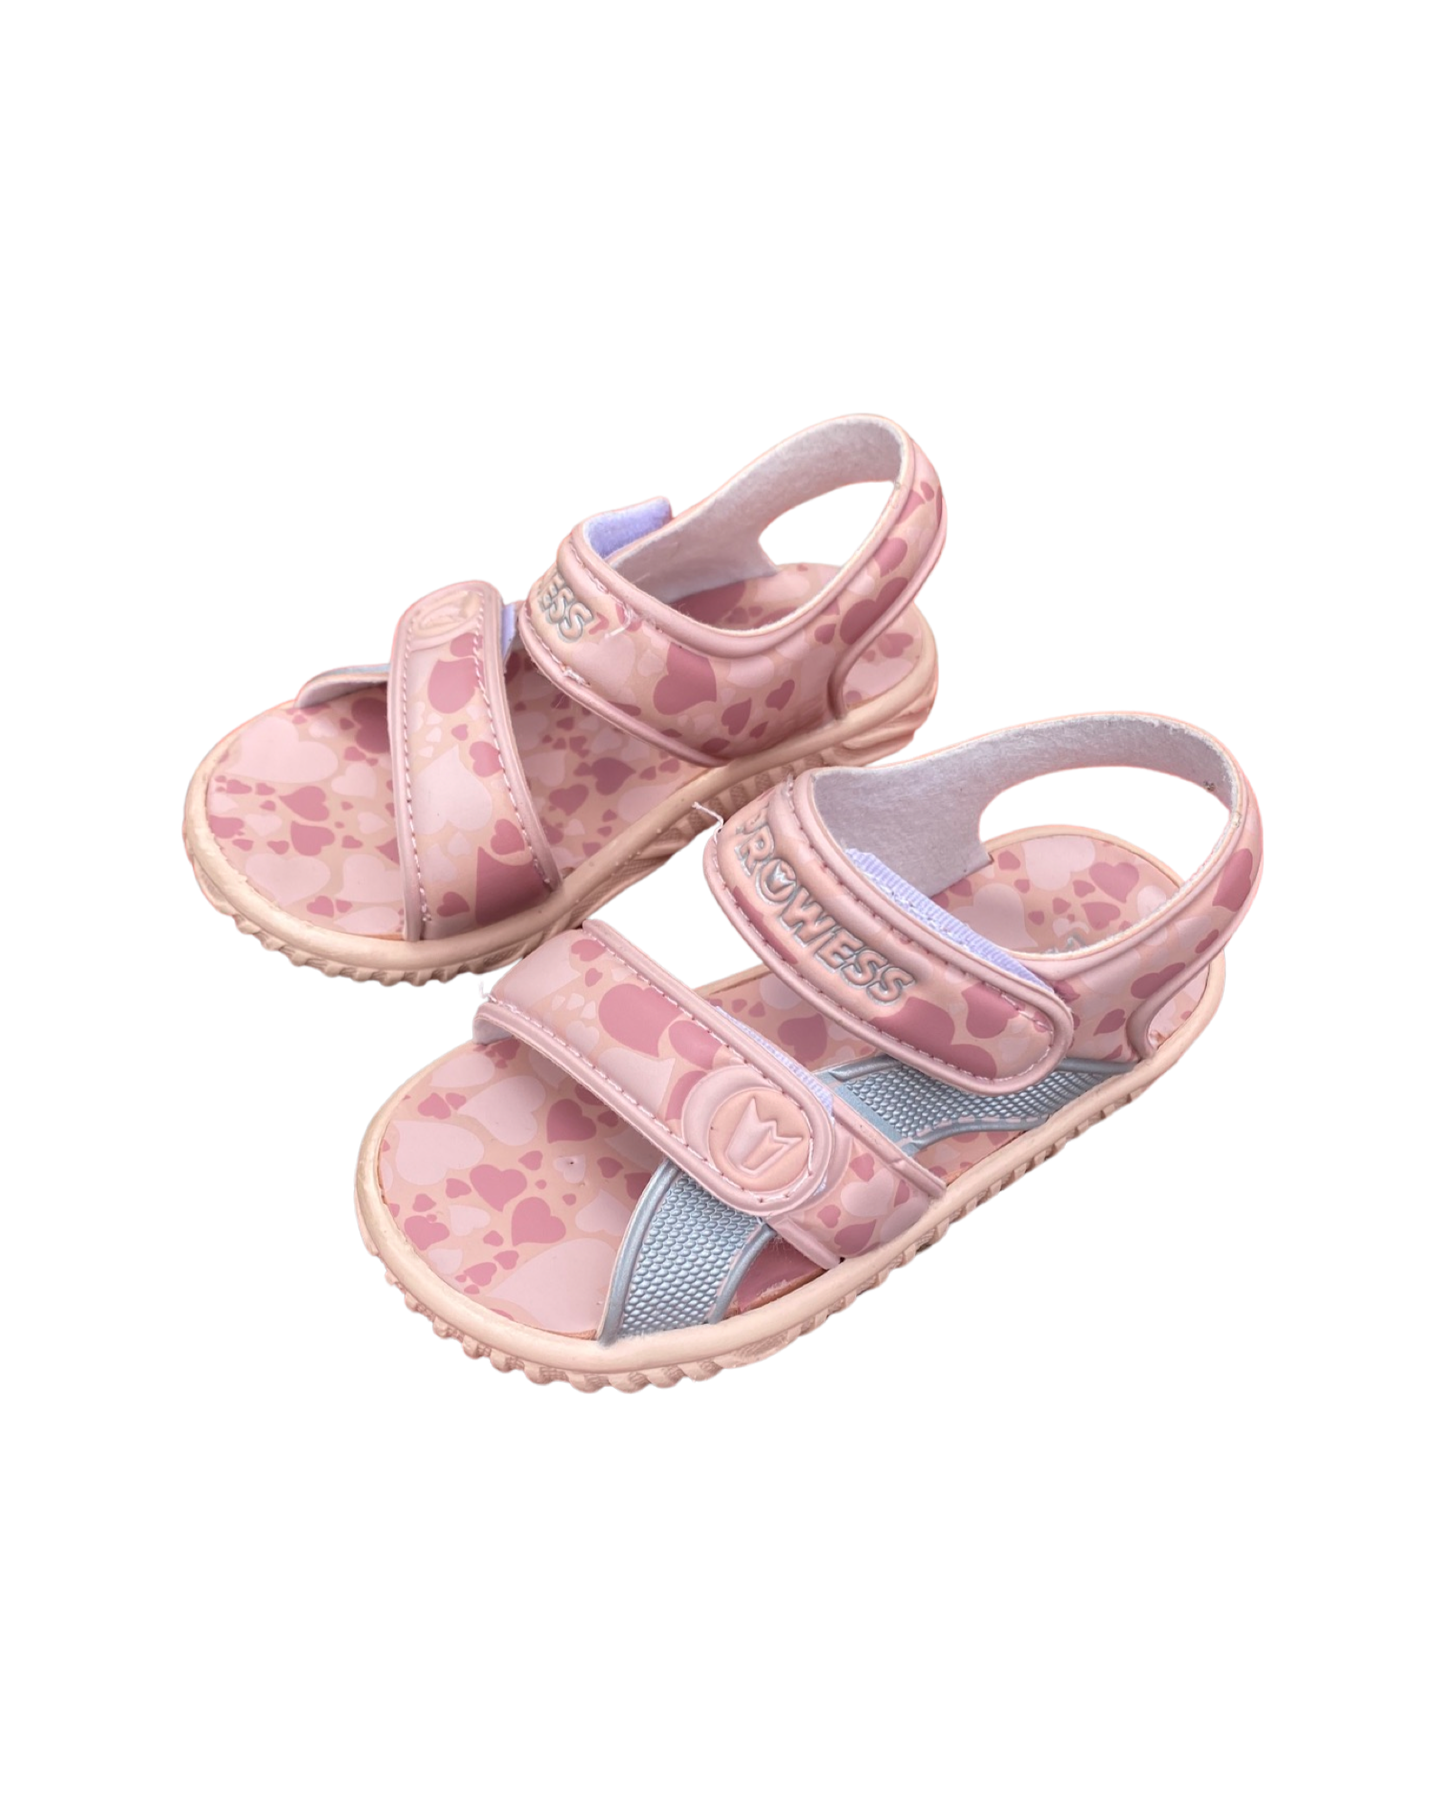 Prowess baby sandals (size EU19/UK3)